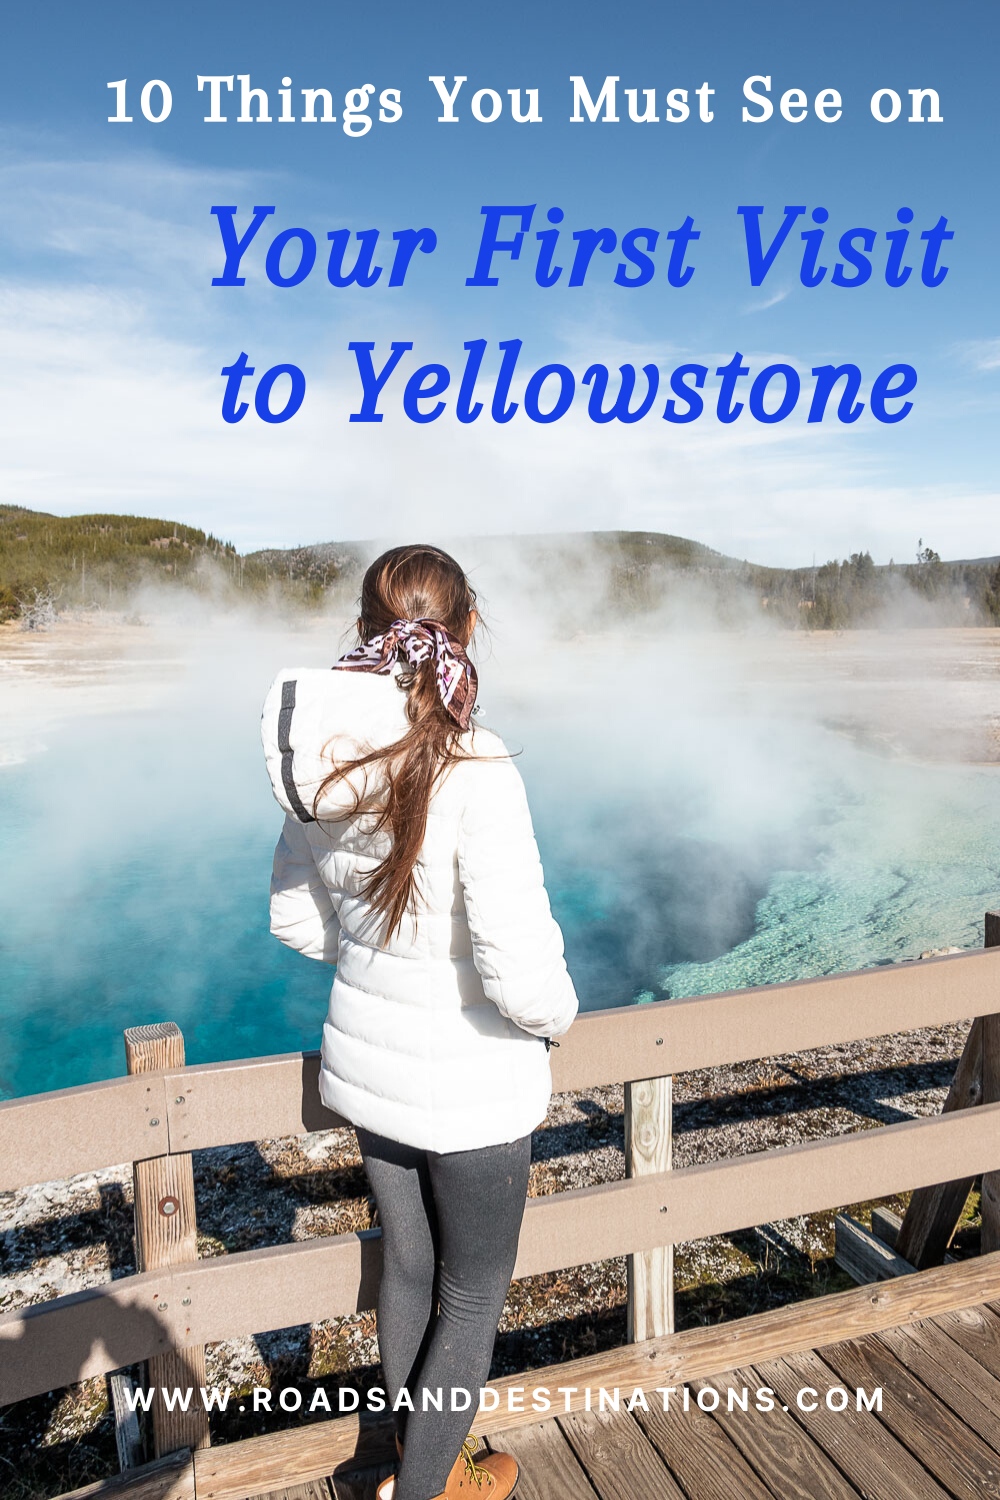 First visit to Yellowstone - Roads and Destinations roadsanddestinations.com